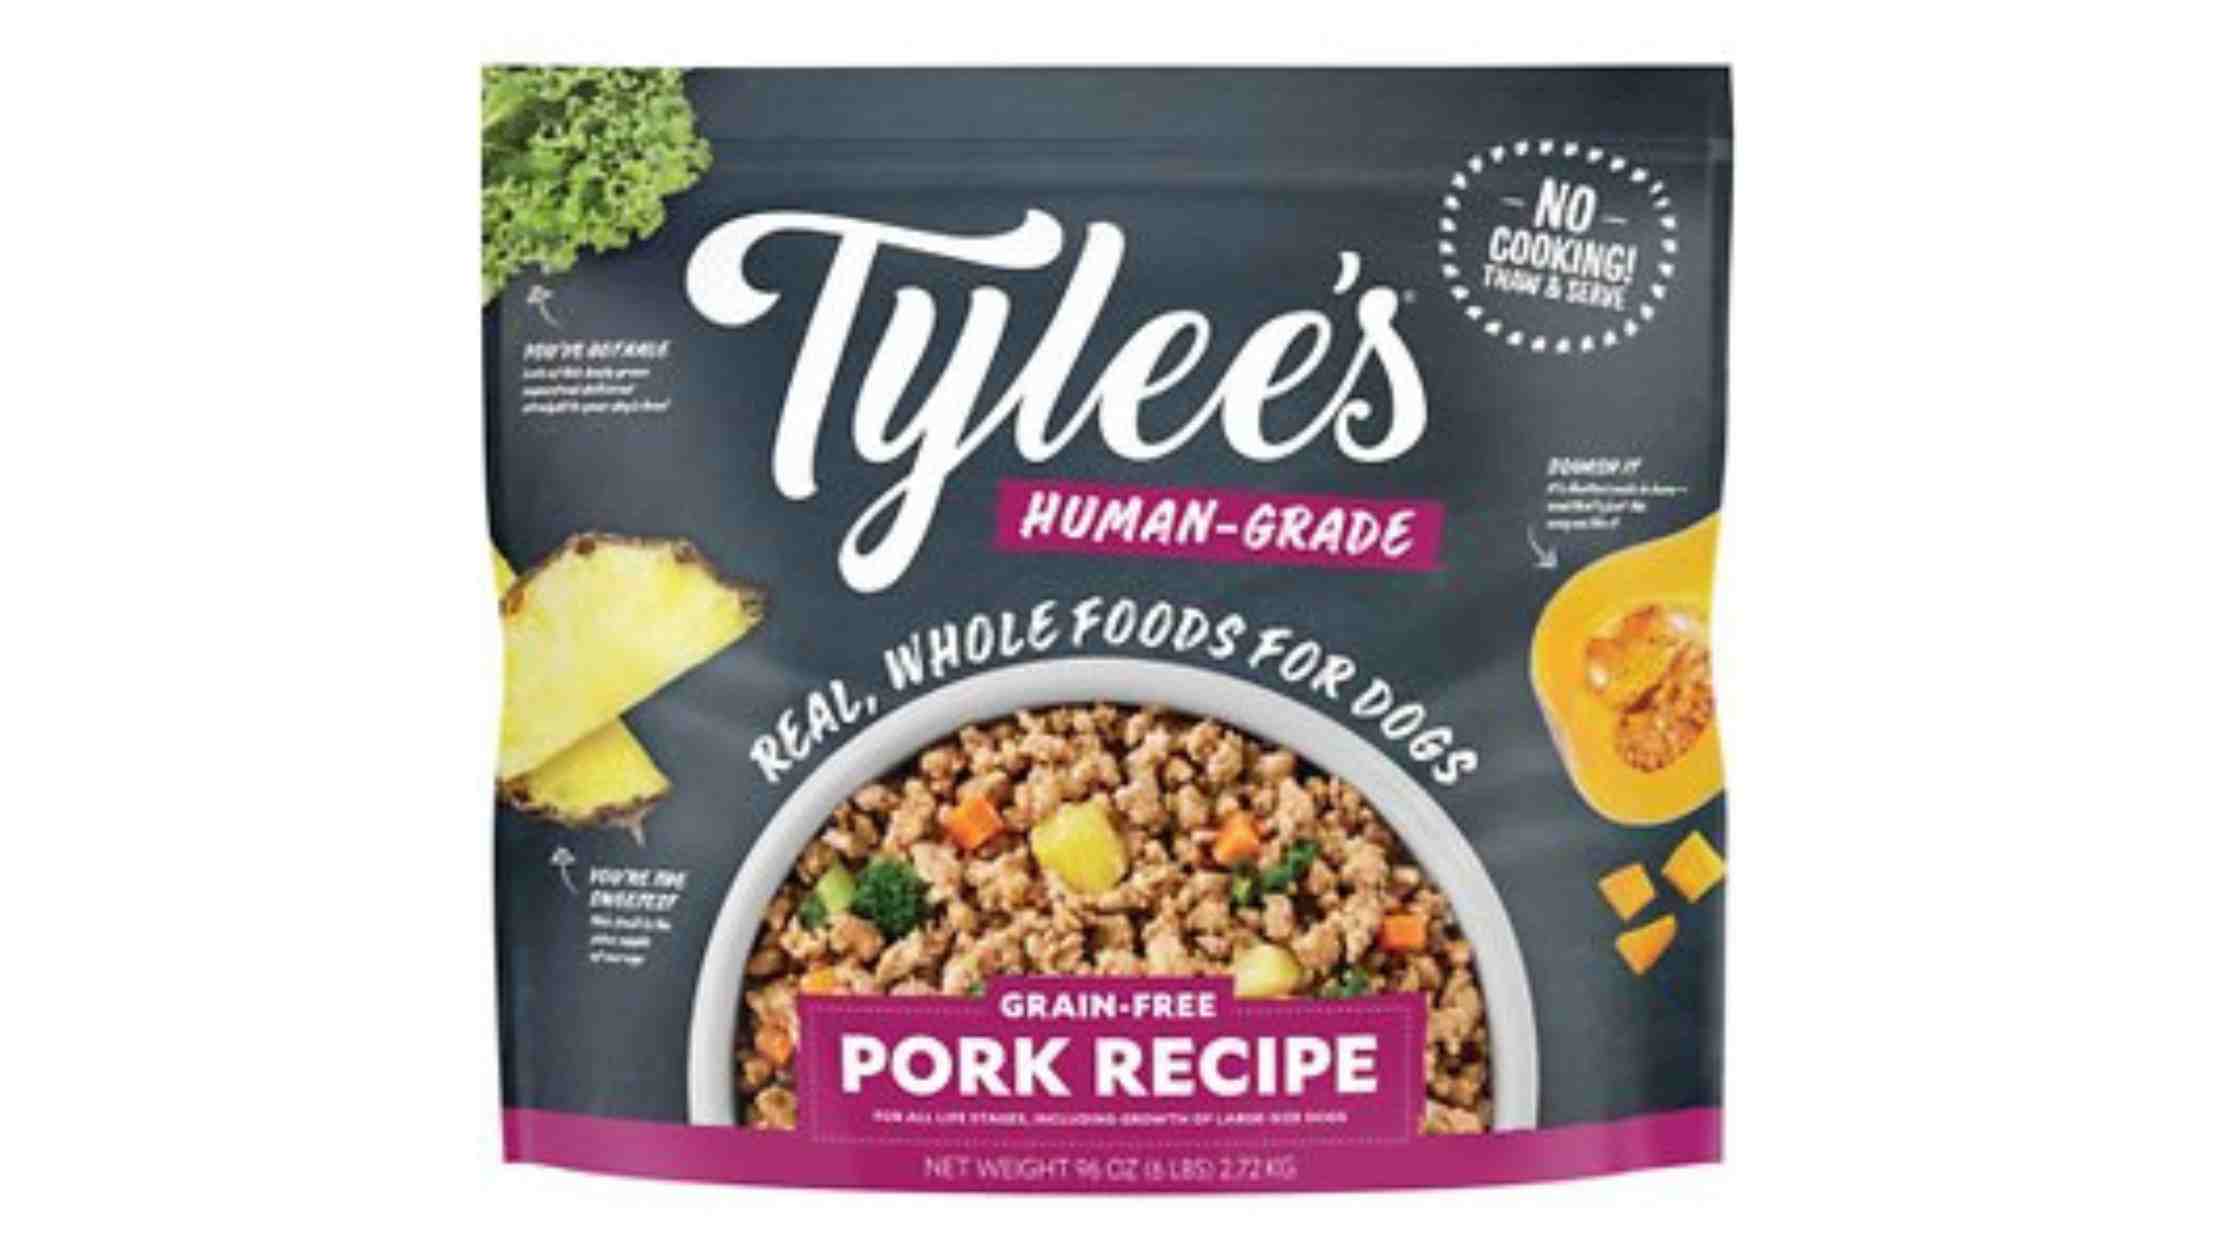 Why is Tylee's Dog Food Unavailable?